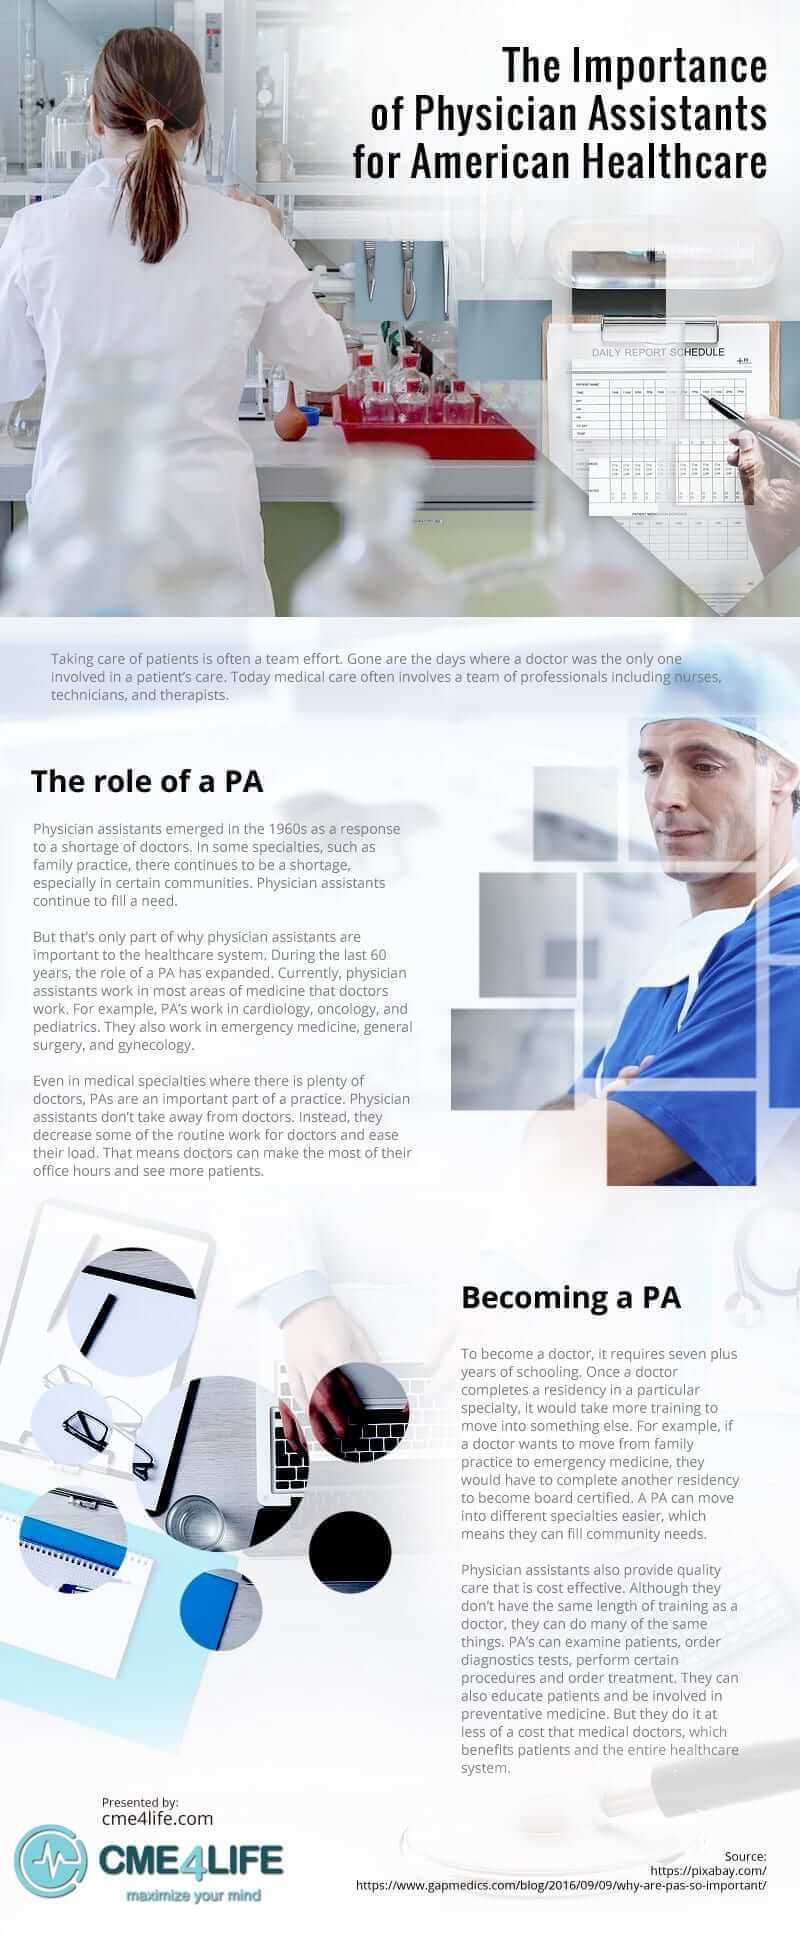 The Importance of Physician Assistants for American Healthcare [infographic]